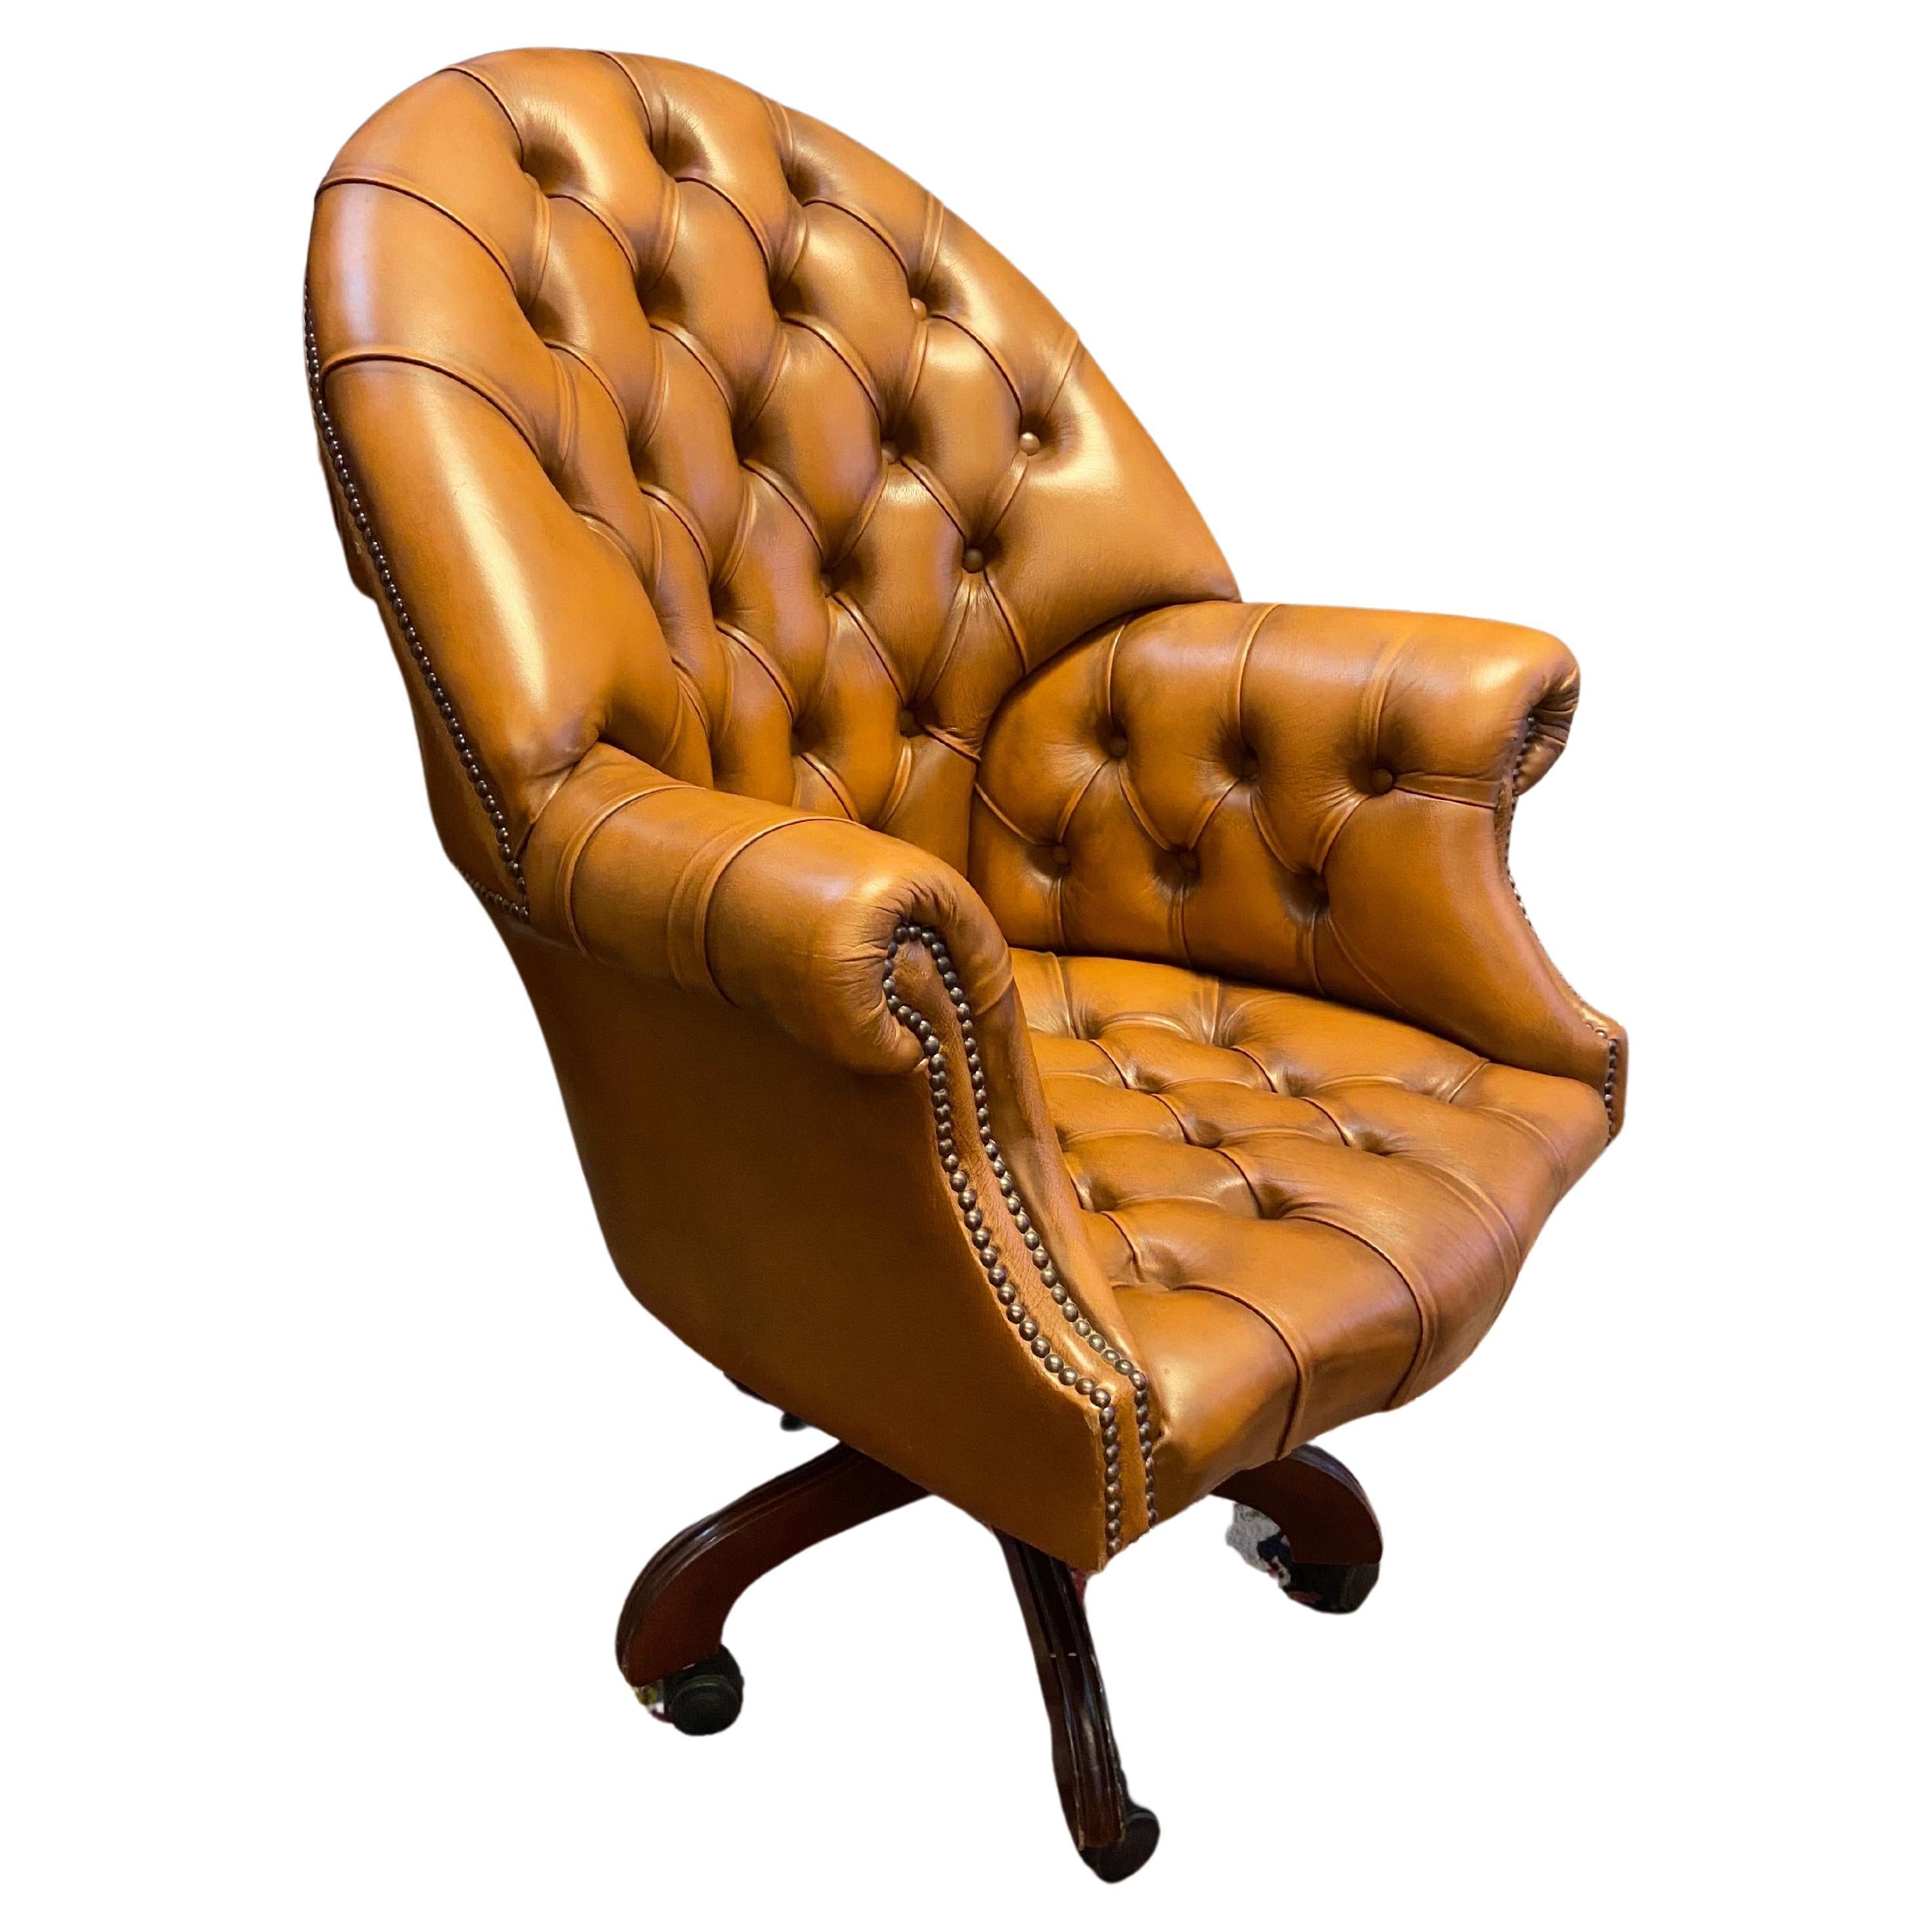 20th Century Cognac Leather Chesterfield Swivel Desk Chair For Sale